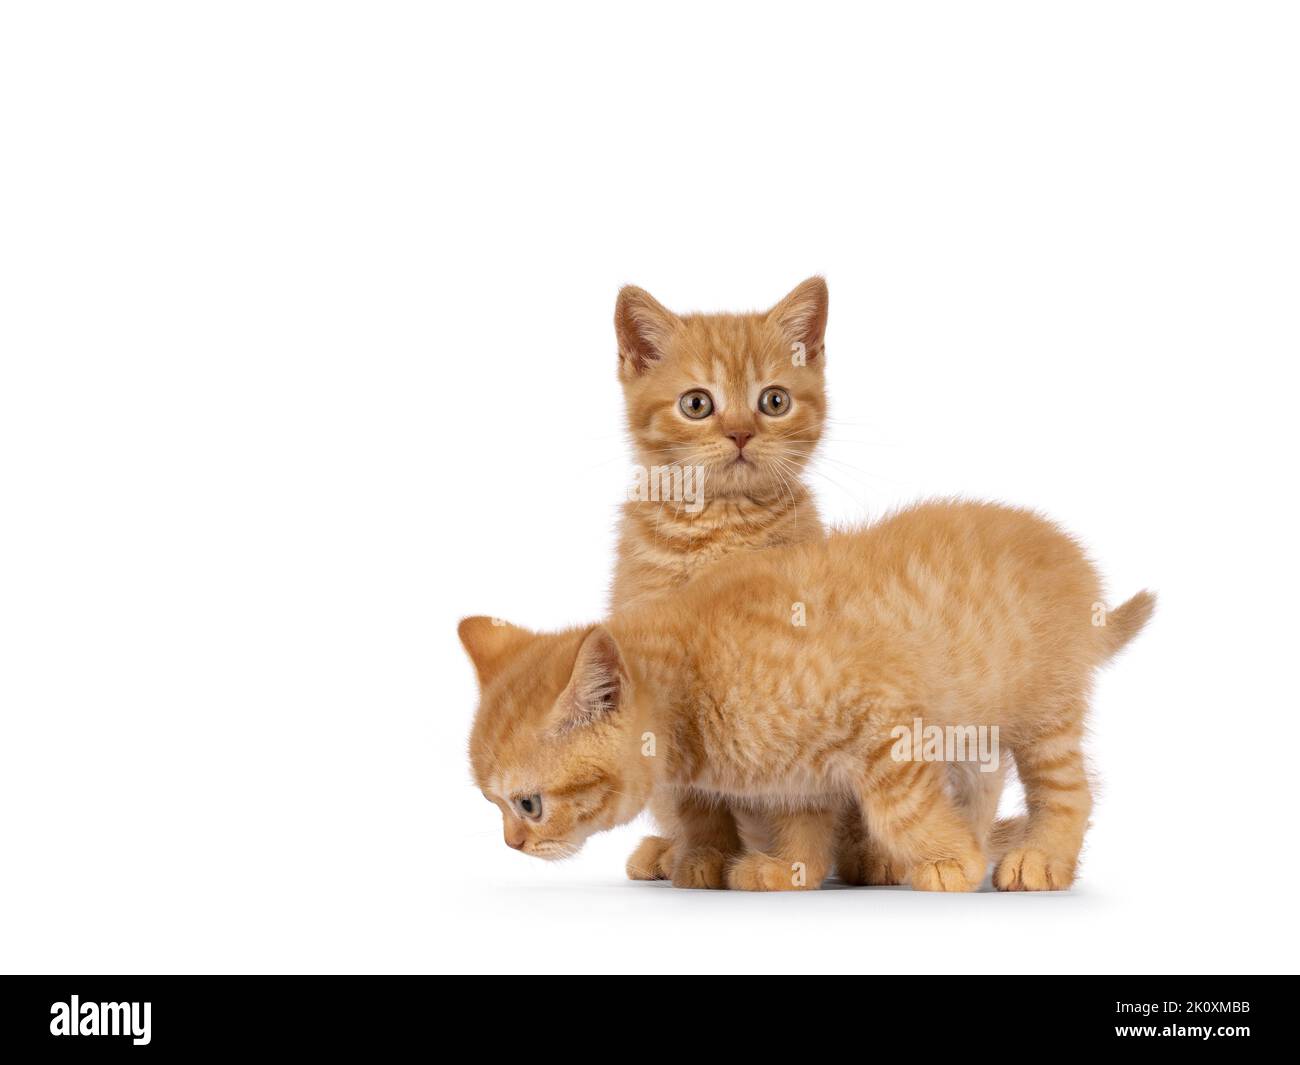 2 Red British Shorthair cat kittens, playing together. Both looking away from camera. Isolated on a white background. Stock Photo